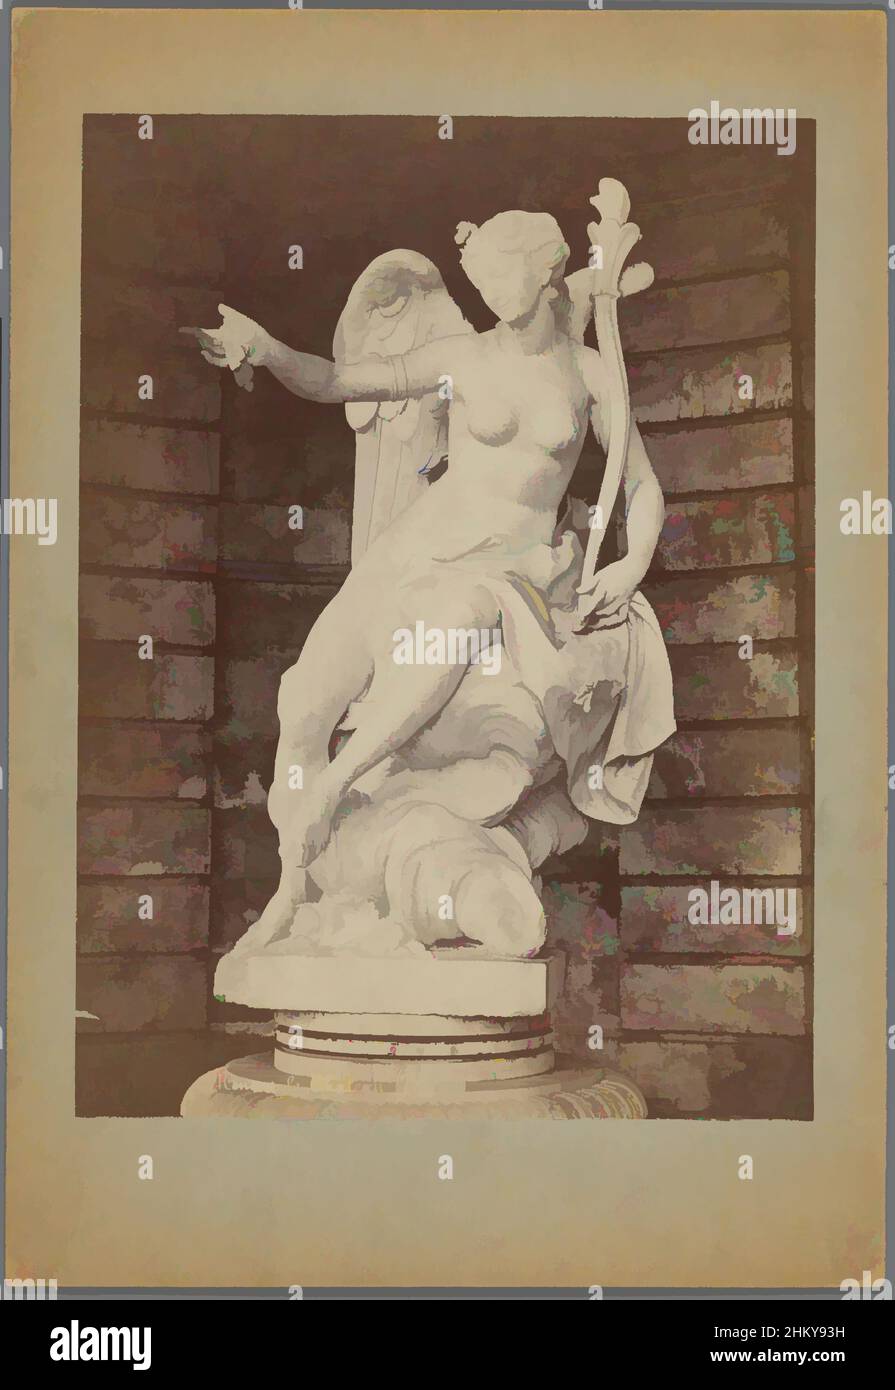 Art inspired by Sculpture in the garden of the Château of Menars, depicting Aurora, Menars le Château (L'Aurore), Séraphin-Médéric Mieusement, Menars, c. 1875 - c. 1900, cardboard, albumen print, height 340 mm × width 250 mm, Classic works modernized by Artotop with a splash of modernity. Shapes, color and value, eye-catching visual impact on art. Emotions through freedom of artworks in a contemporary way. A timeless message pursuing a wildly creative new direction. Artists turning to the digital medium and creating the Artotop NFT Stock Photo